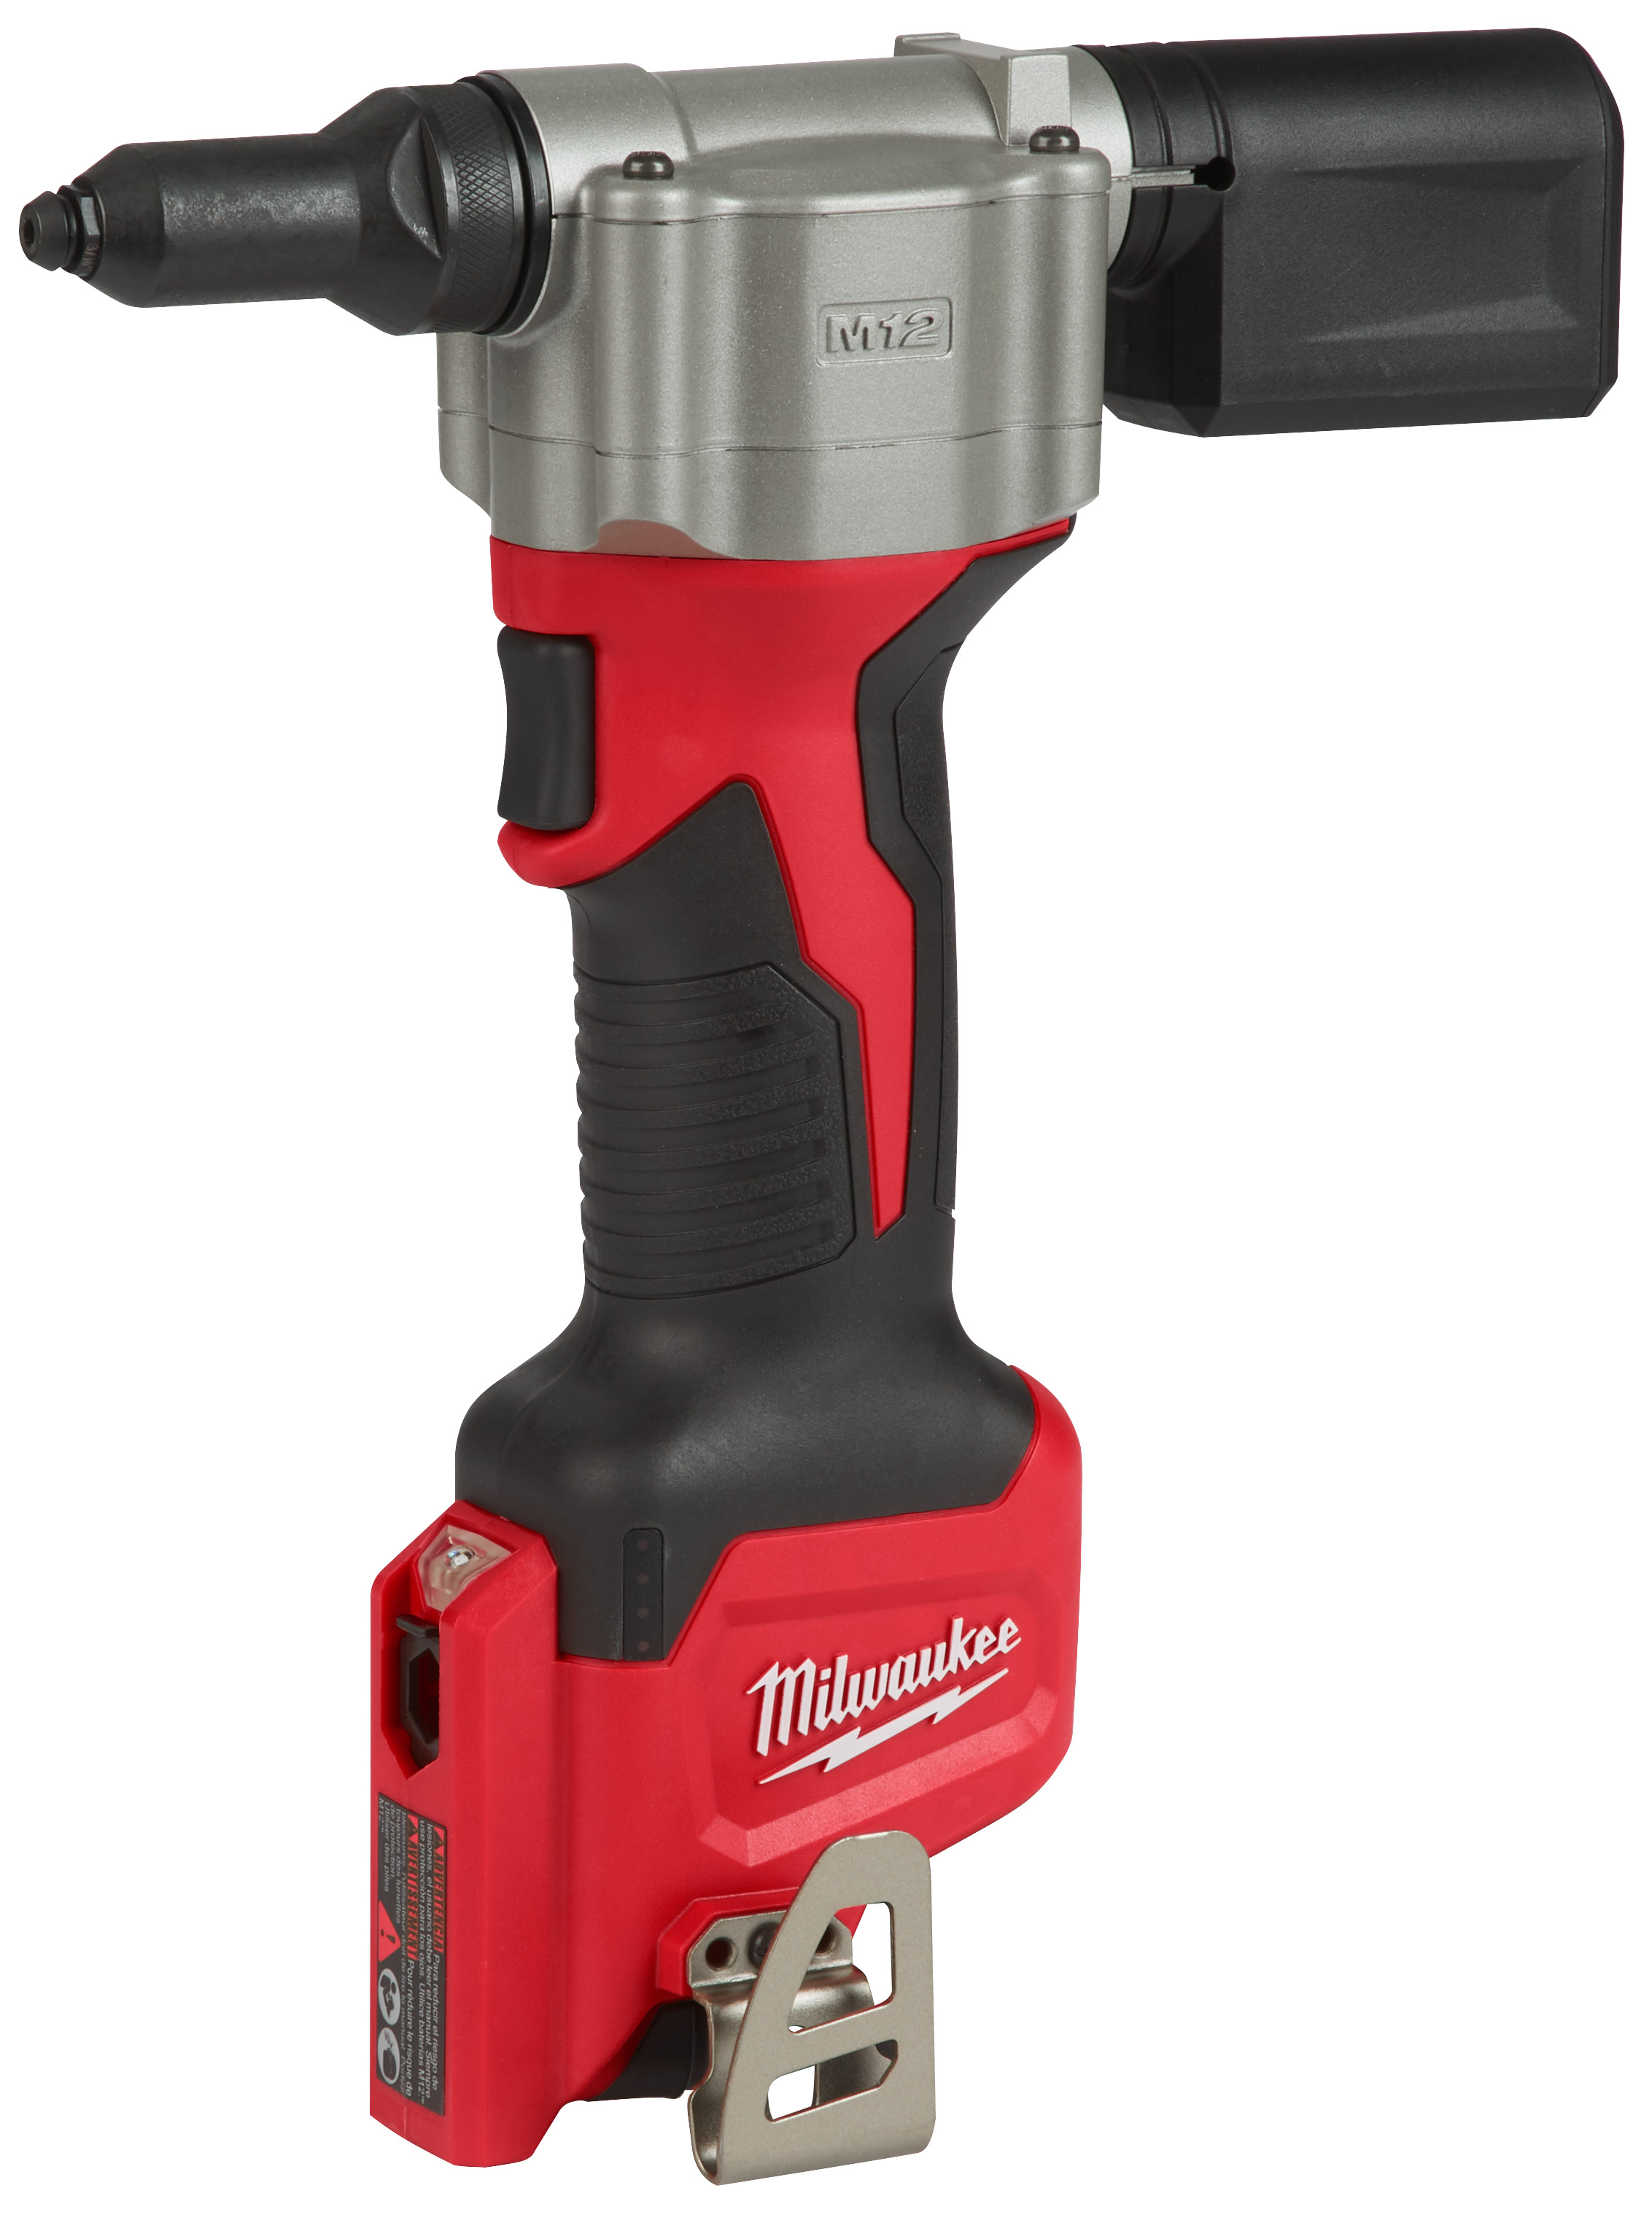 The M12™ rivet tool is the first cordless solution that delivers fast, easy riveting while maintaining performance, durability, and size. The 2550-20 can pull up to 3/16 in. stainless steel rivets, 450 pcs. of 1/8 in. steel rivets on one 1.5 amp hour charge, and reduces muscle effort from a hand tool by over 60%. No compressors or hoses during set up and operation makes this tool a great replacement to pneumatic products. 2X longer life over current cordless solutions delivers greater durability from common jobsite conditions and use. This is the most compact cordless rivet tool on the market, measuring only 6.5 in. in length allowing users more access in tight spaces. The M12 rivet tool is part of the M12 battery platform, offering 90+ solutions on one battery system.